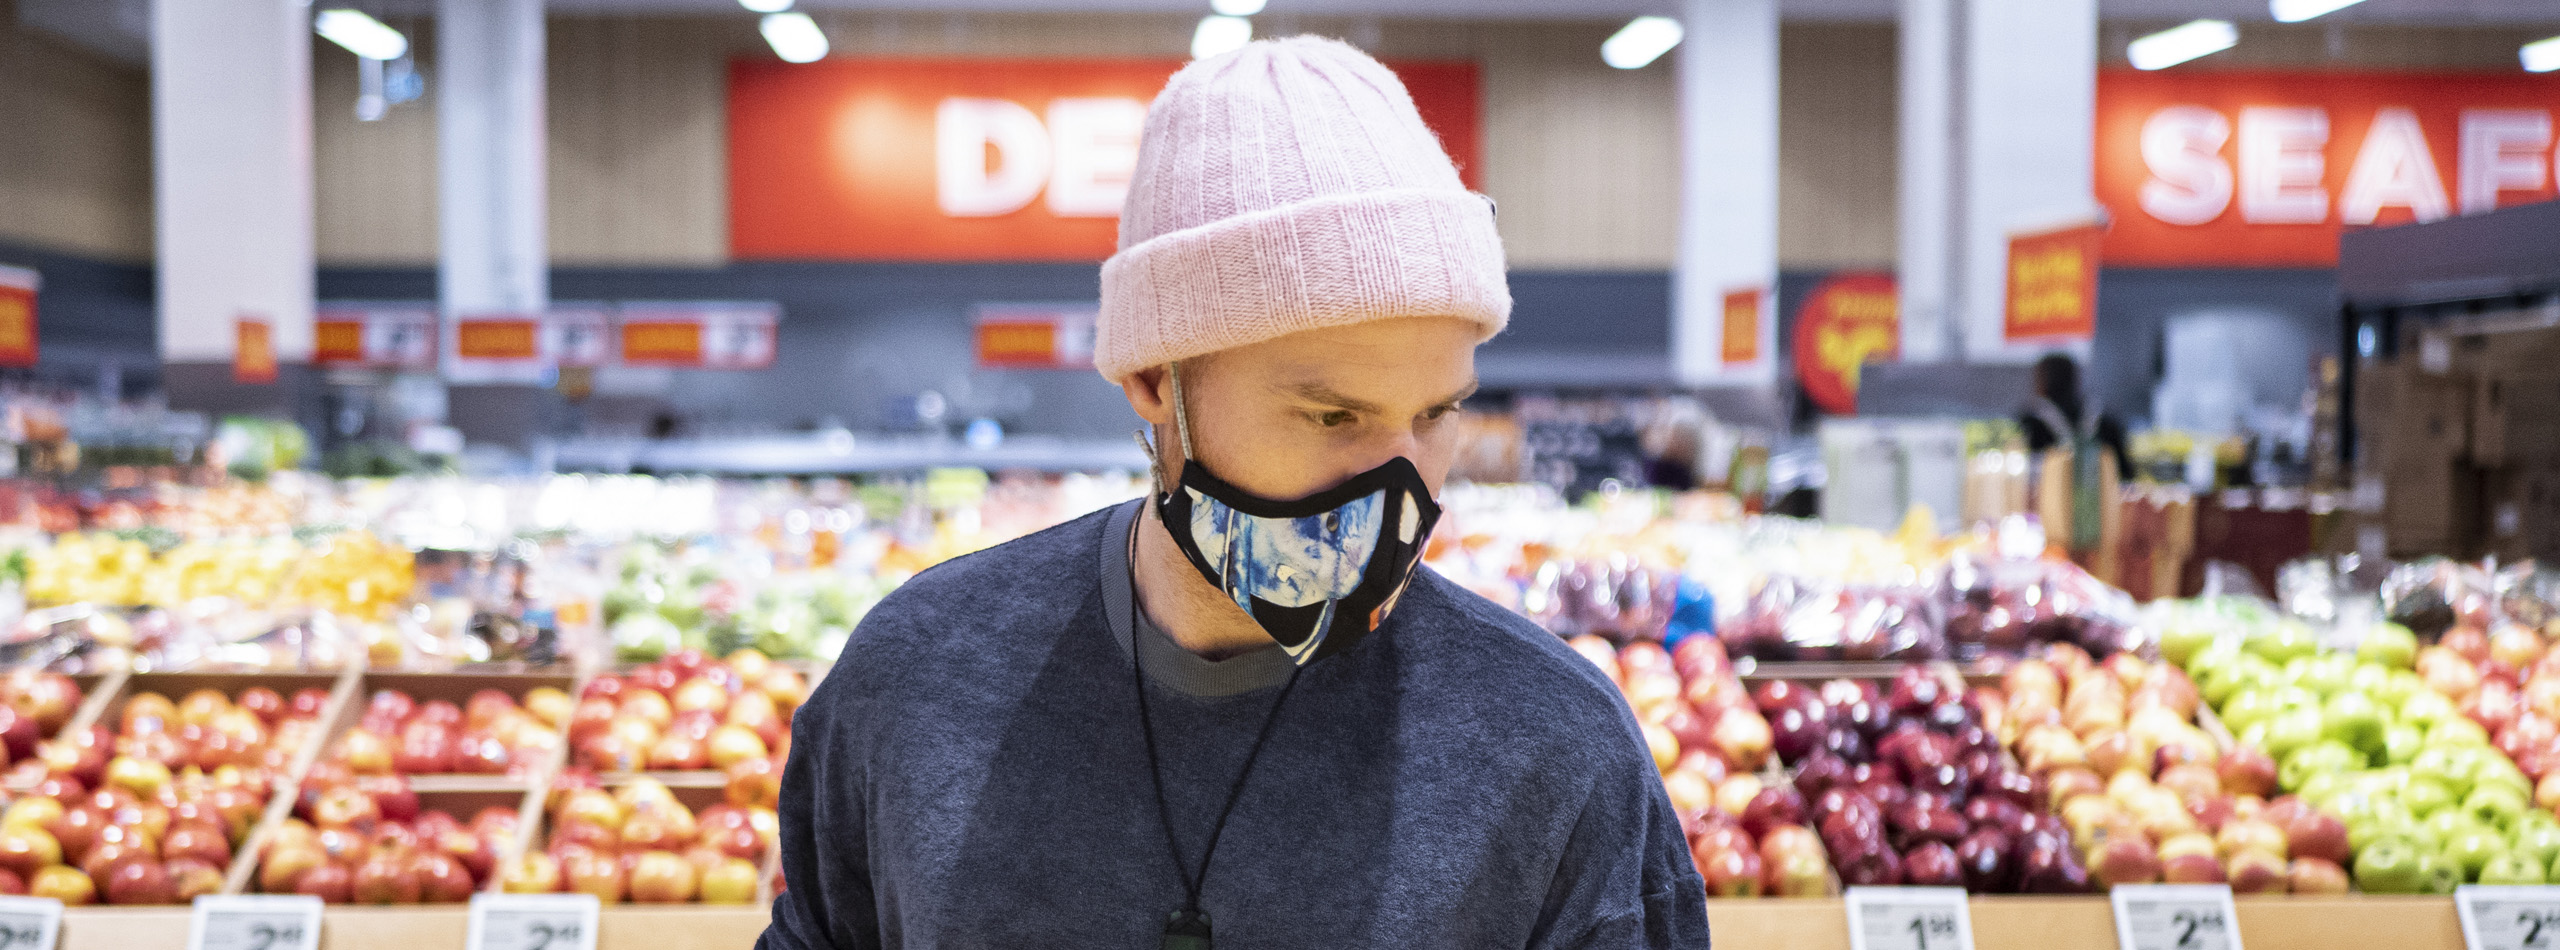 Man with face covering in grocery store